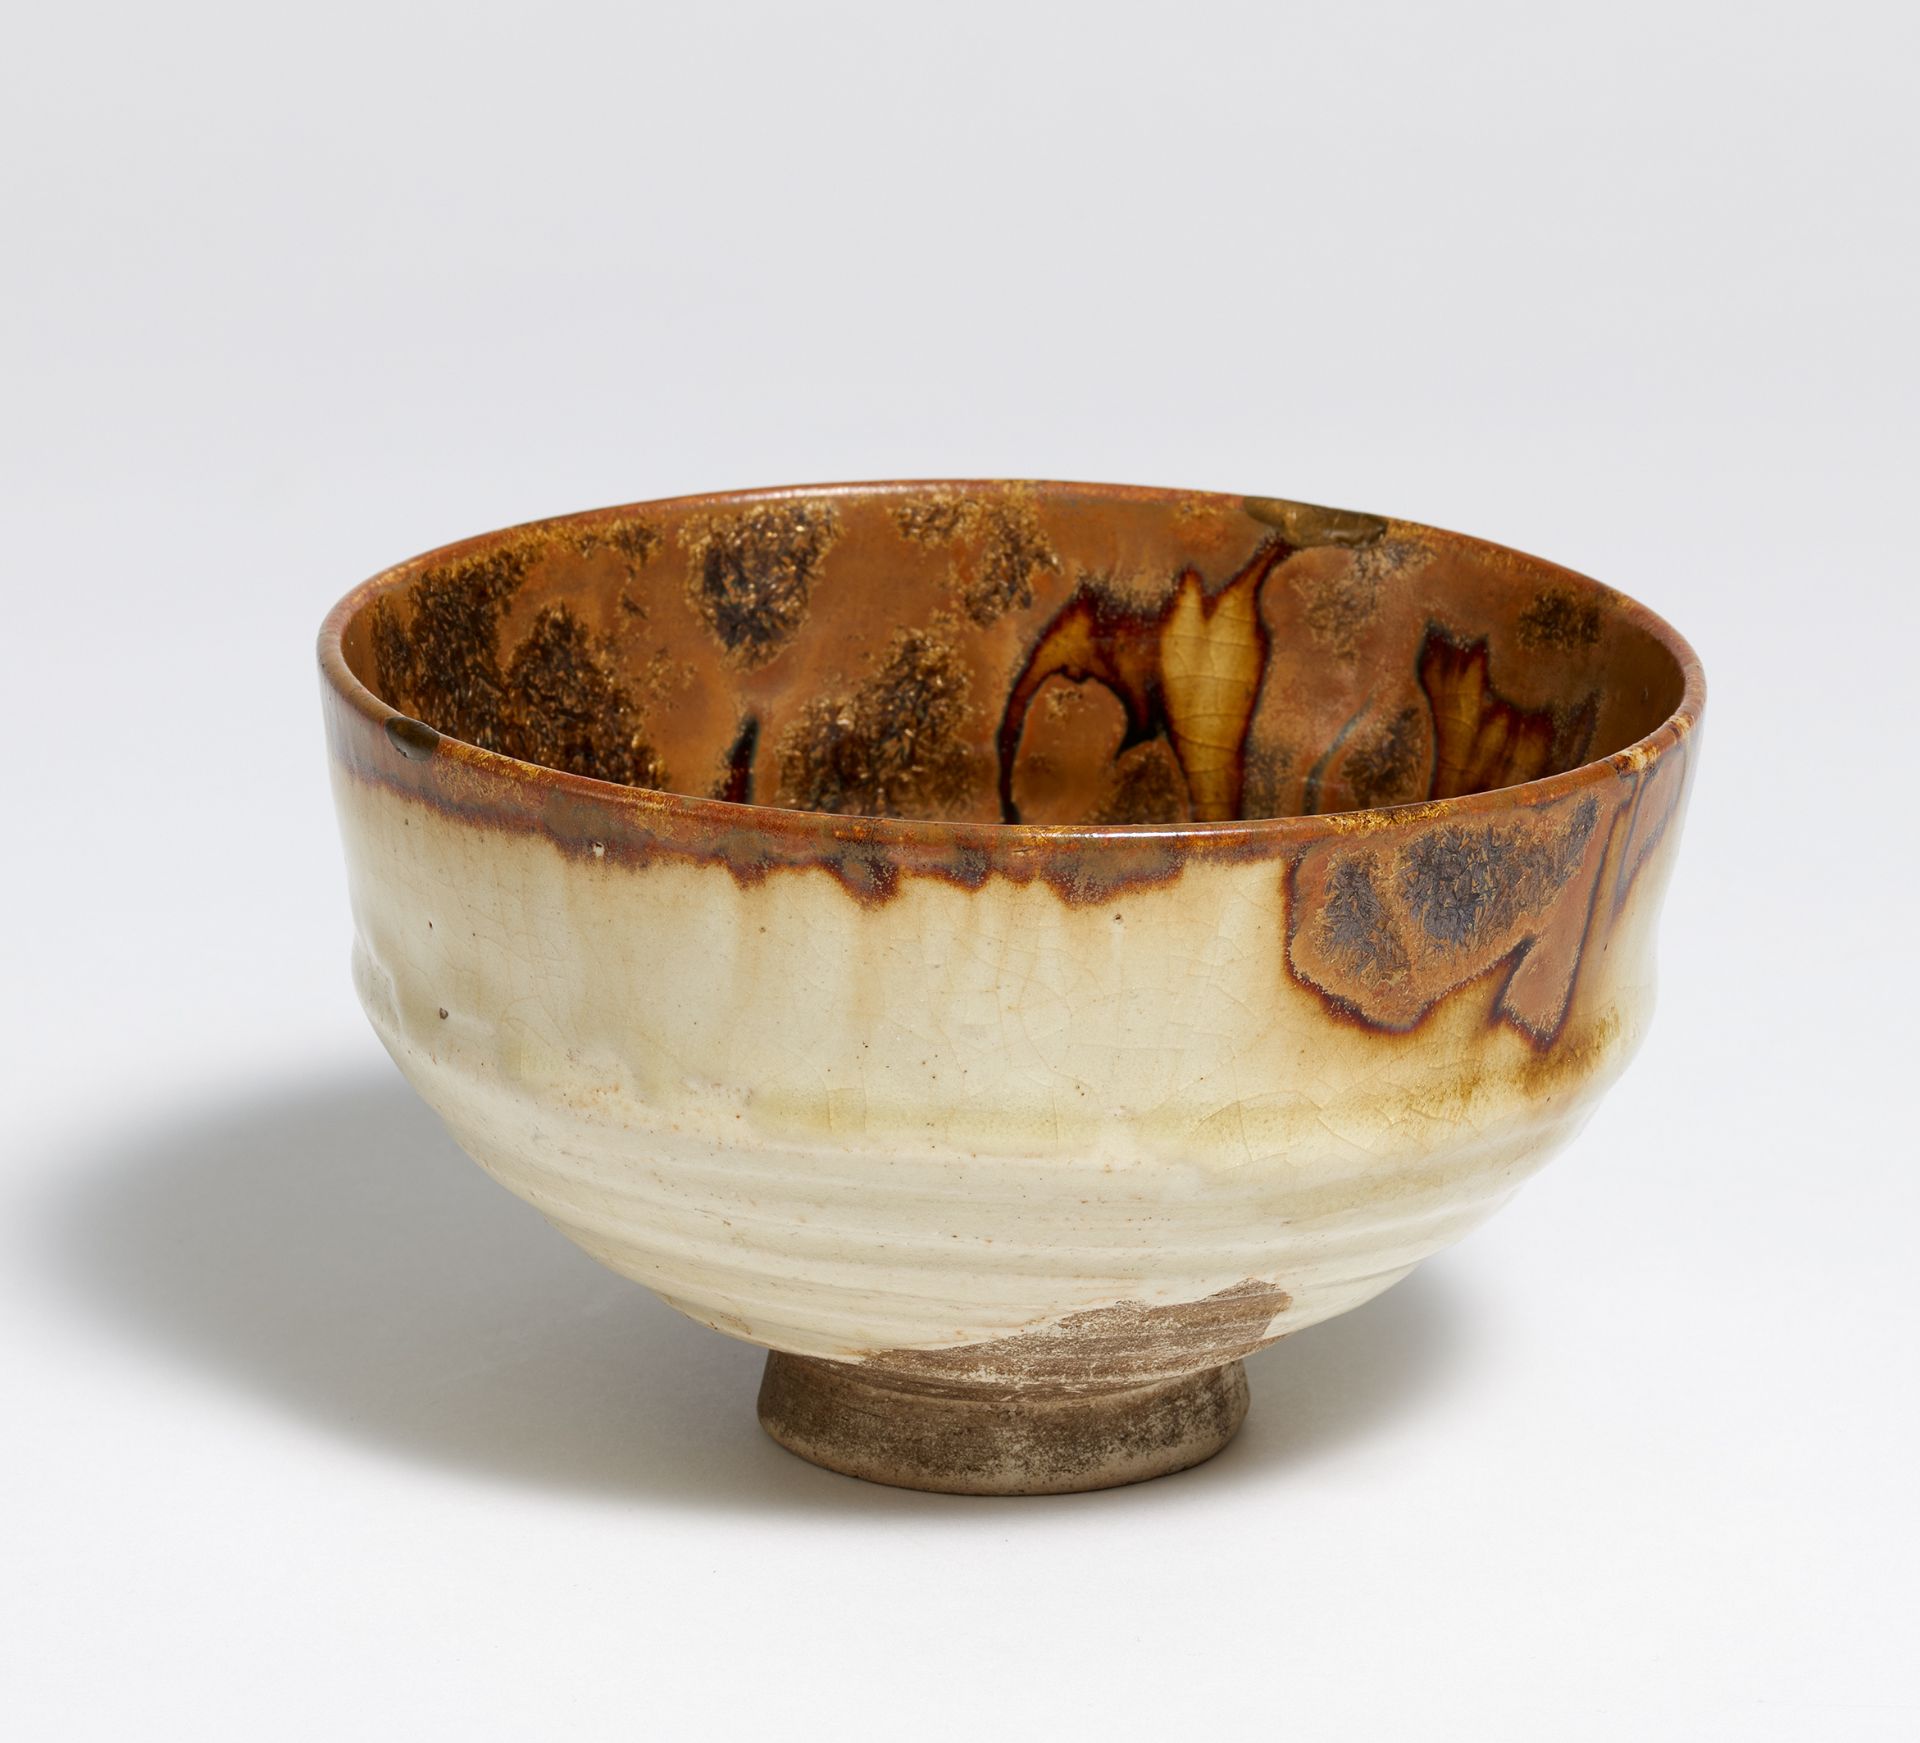 TEABOWL (CHAWAN) WITH IRON GLAZE. Japan. 18th-19th c. Thinly turned, light colored and fine